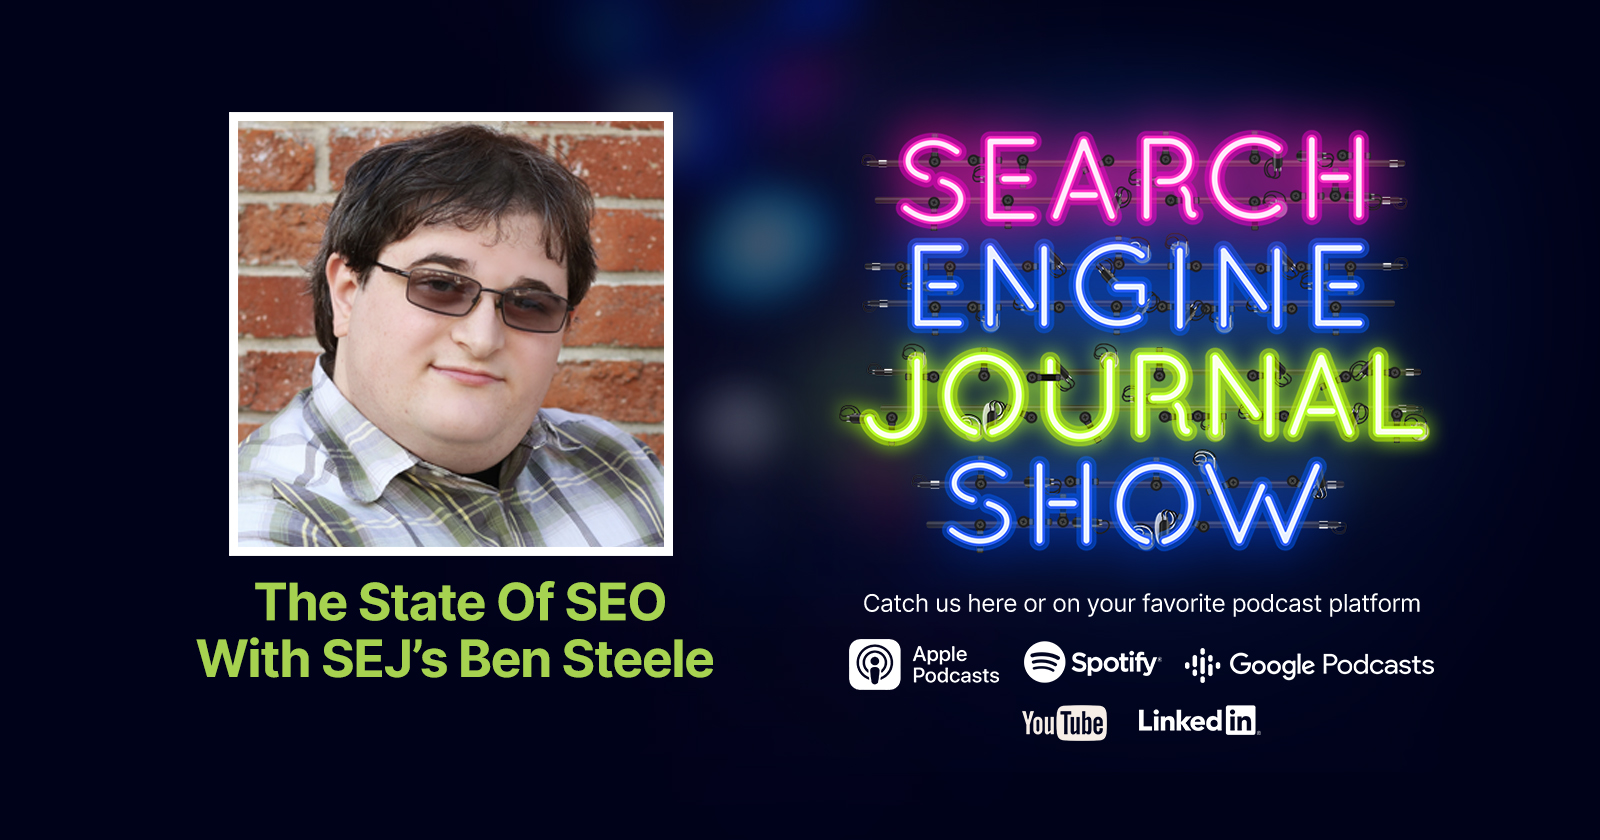 The State of SEO with Ben Steele from SEJ [Podcast]